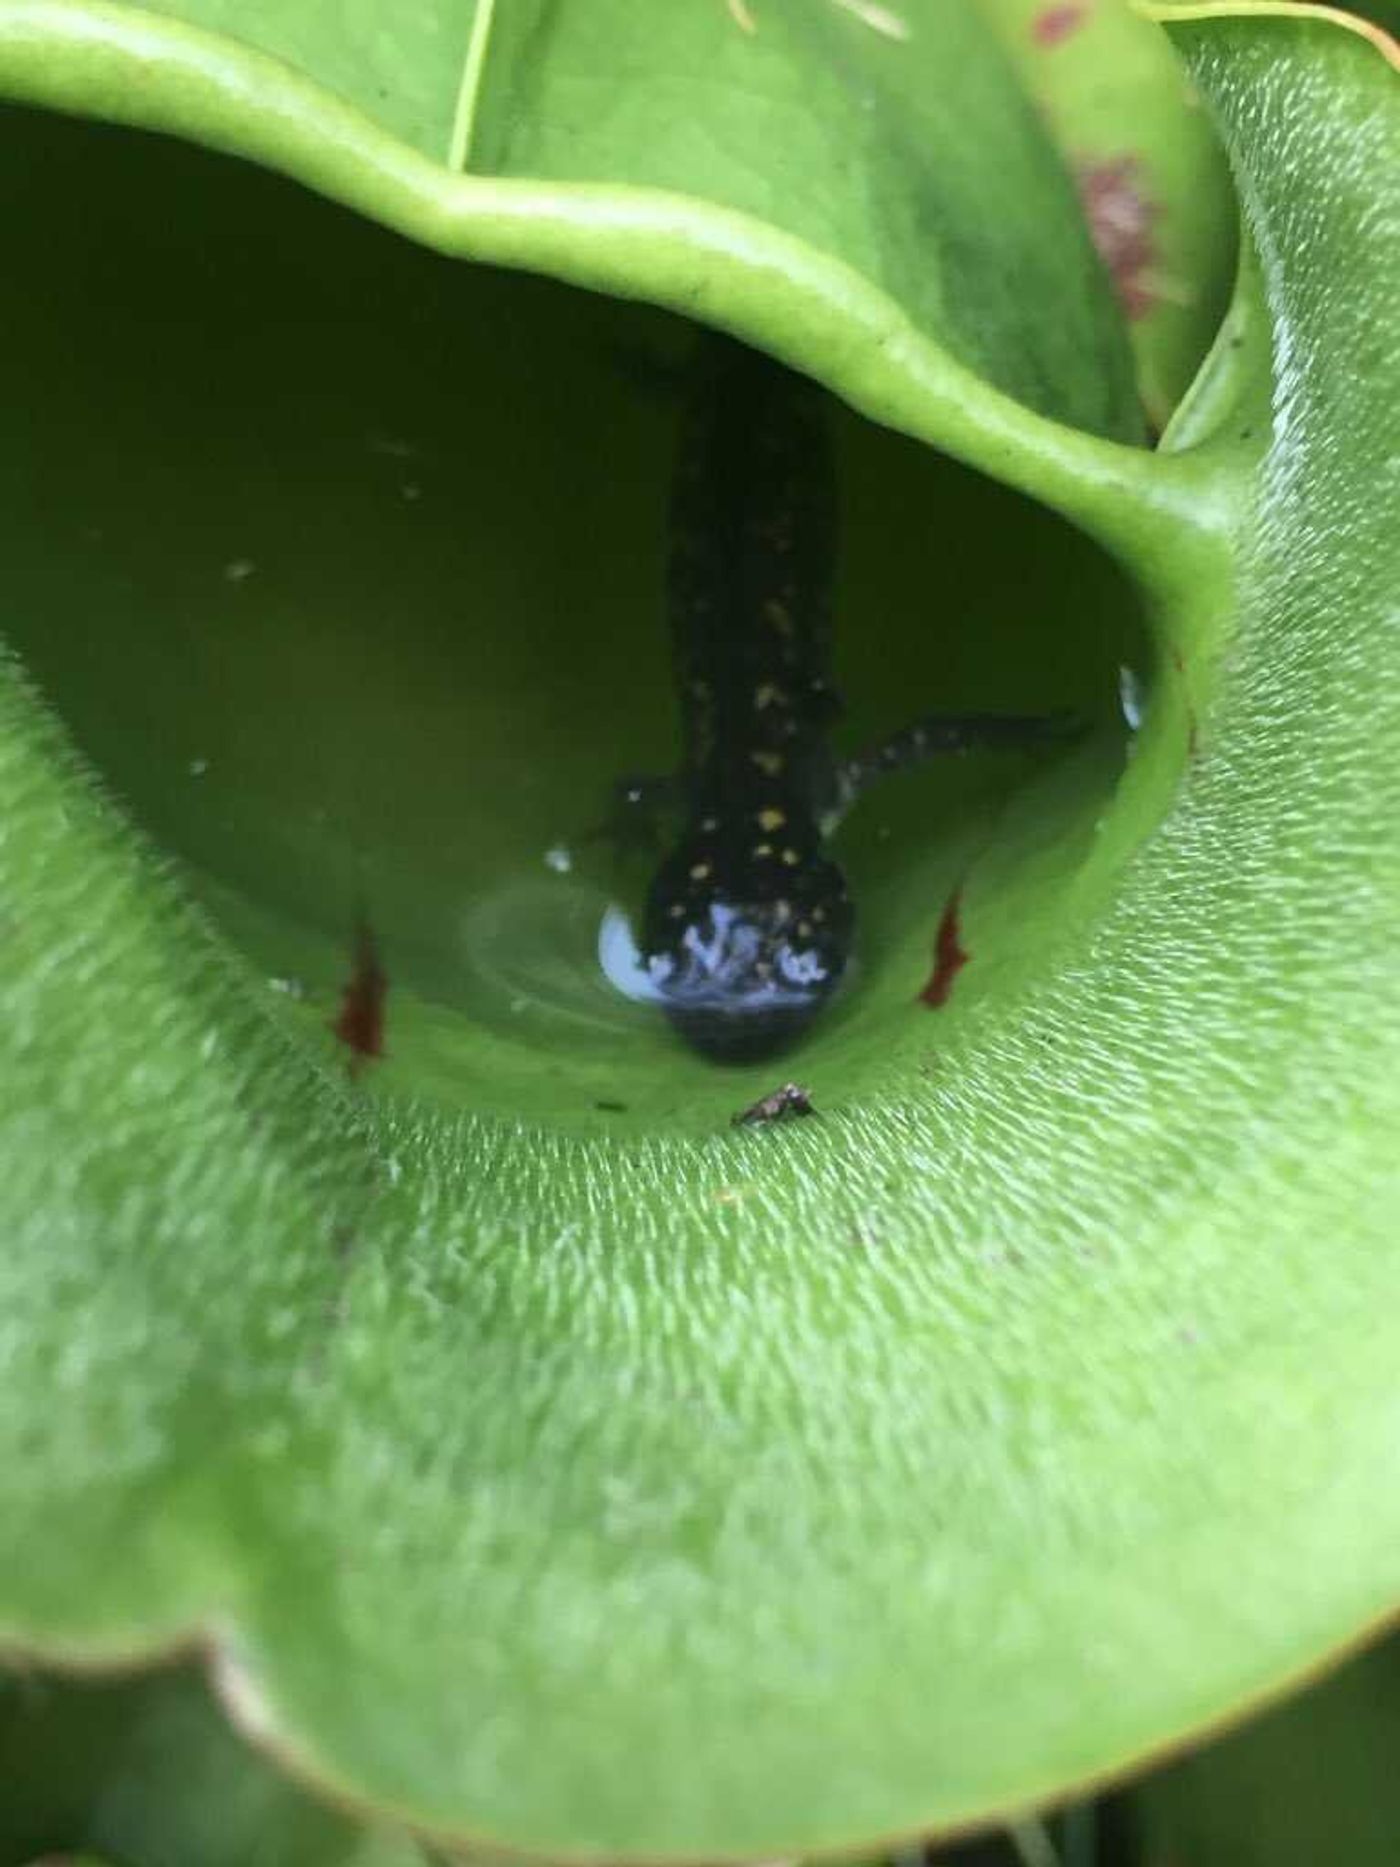 A salamander inside of one of Ontario's pitcher plants.